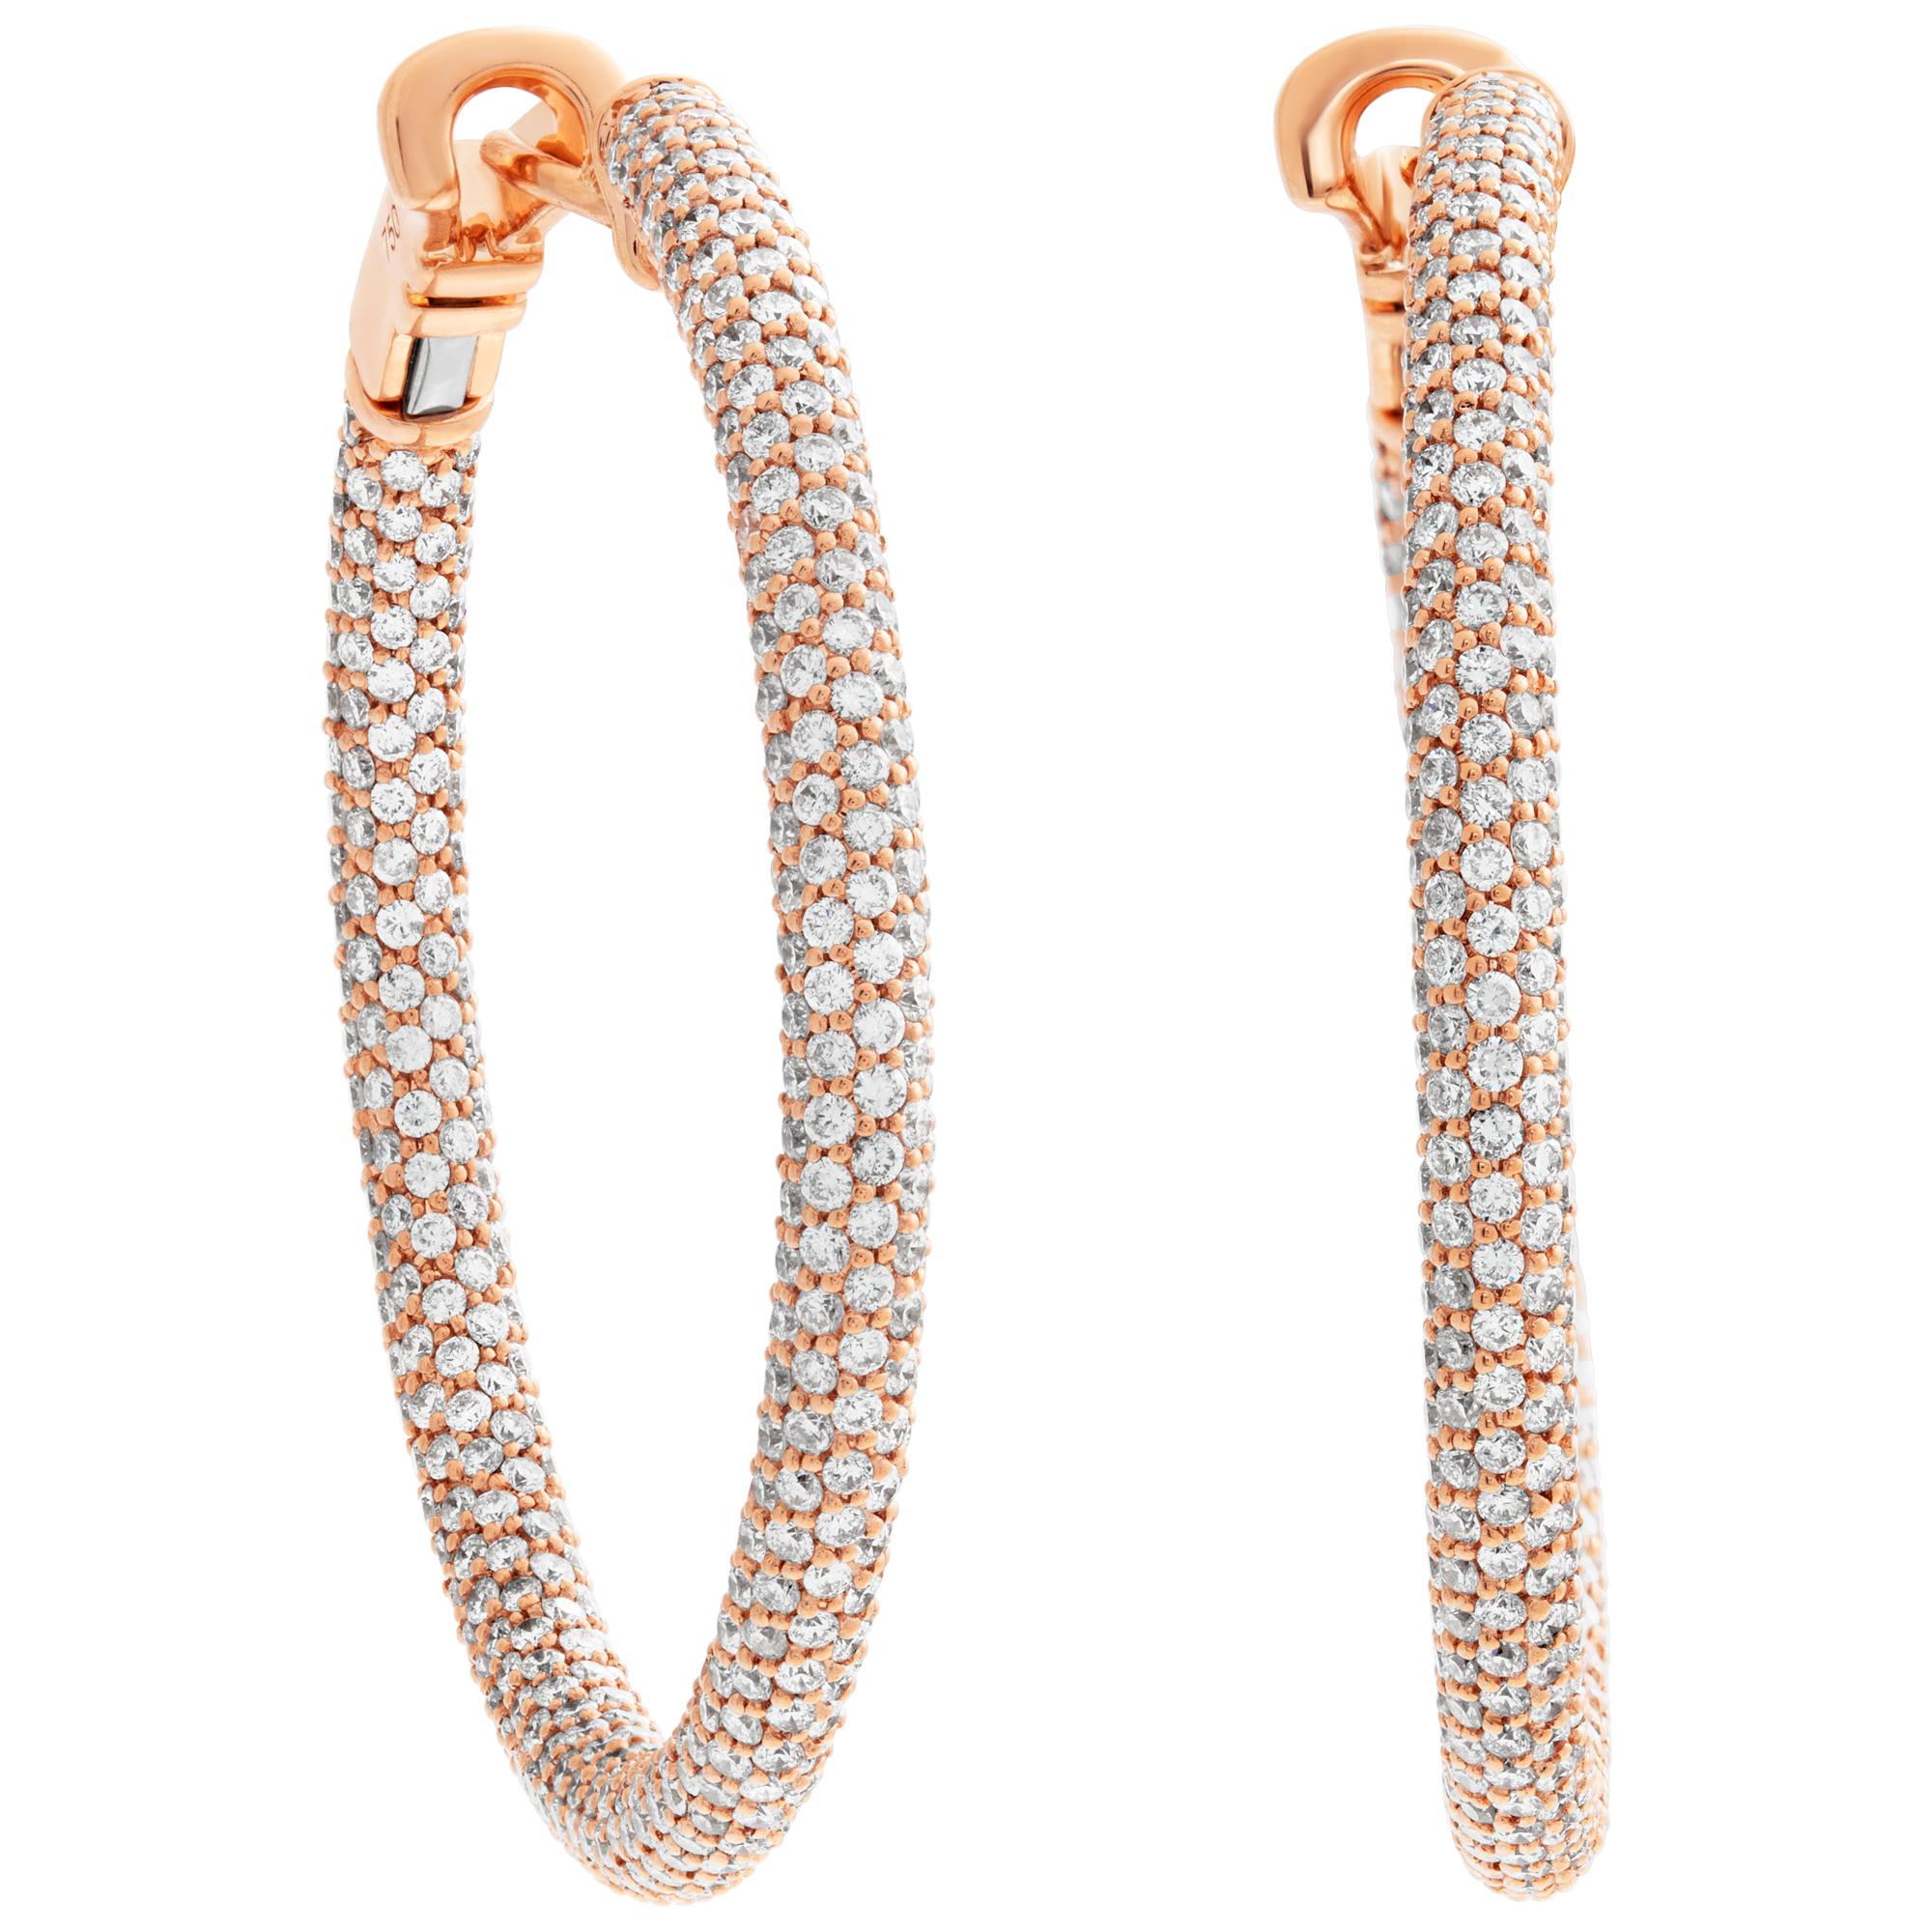 18k rose gold pave diamond hoop earrings with 6.90 carats in round brilliant G-H color, VS-SI clarity diamonds, hangs 1.6 inches, 3mm thick.